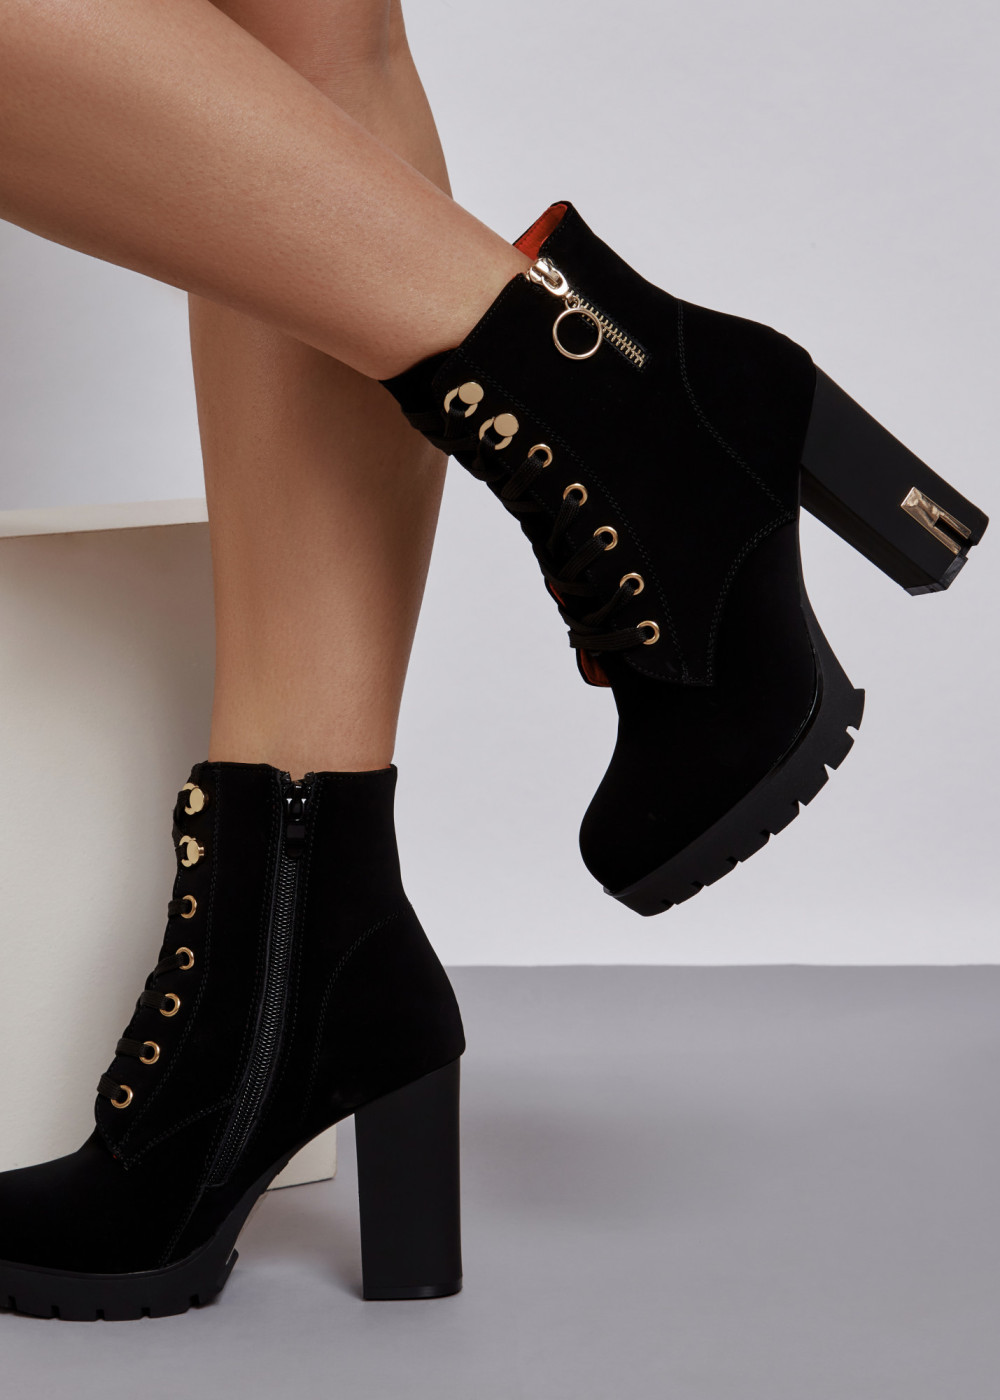 Women's Fashionable Pointed-toe Boots With Thin High Heels, Inner Zipper,  Autumn/winter Lace-up Combat Boots, Stylish And Elegant High Heel Boots  That Are Suitable For Many Occasions | SHEIN ASIA